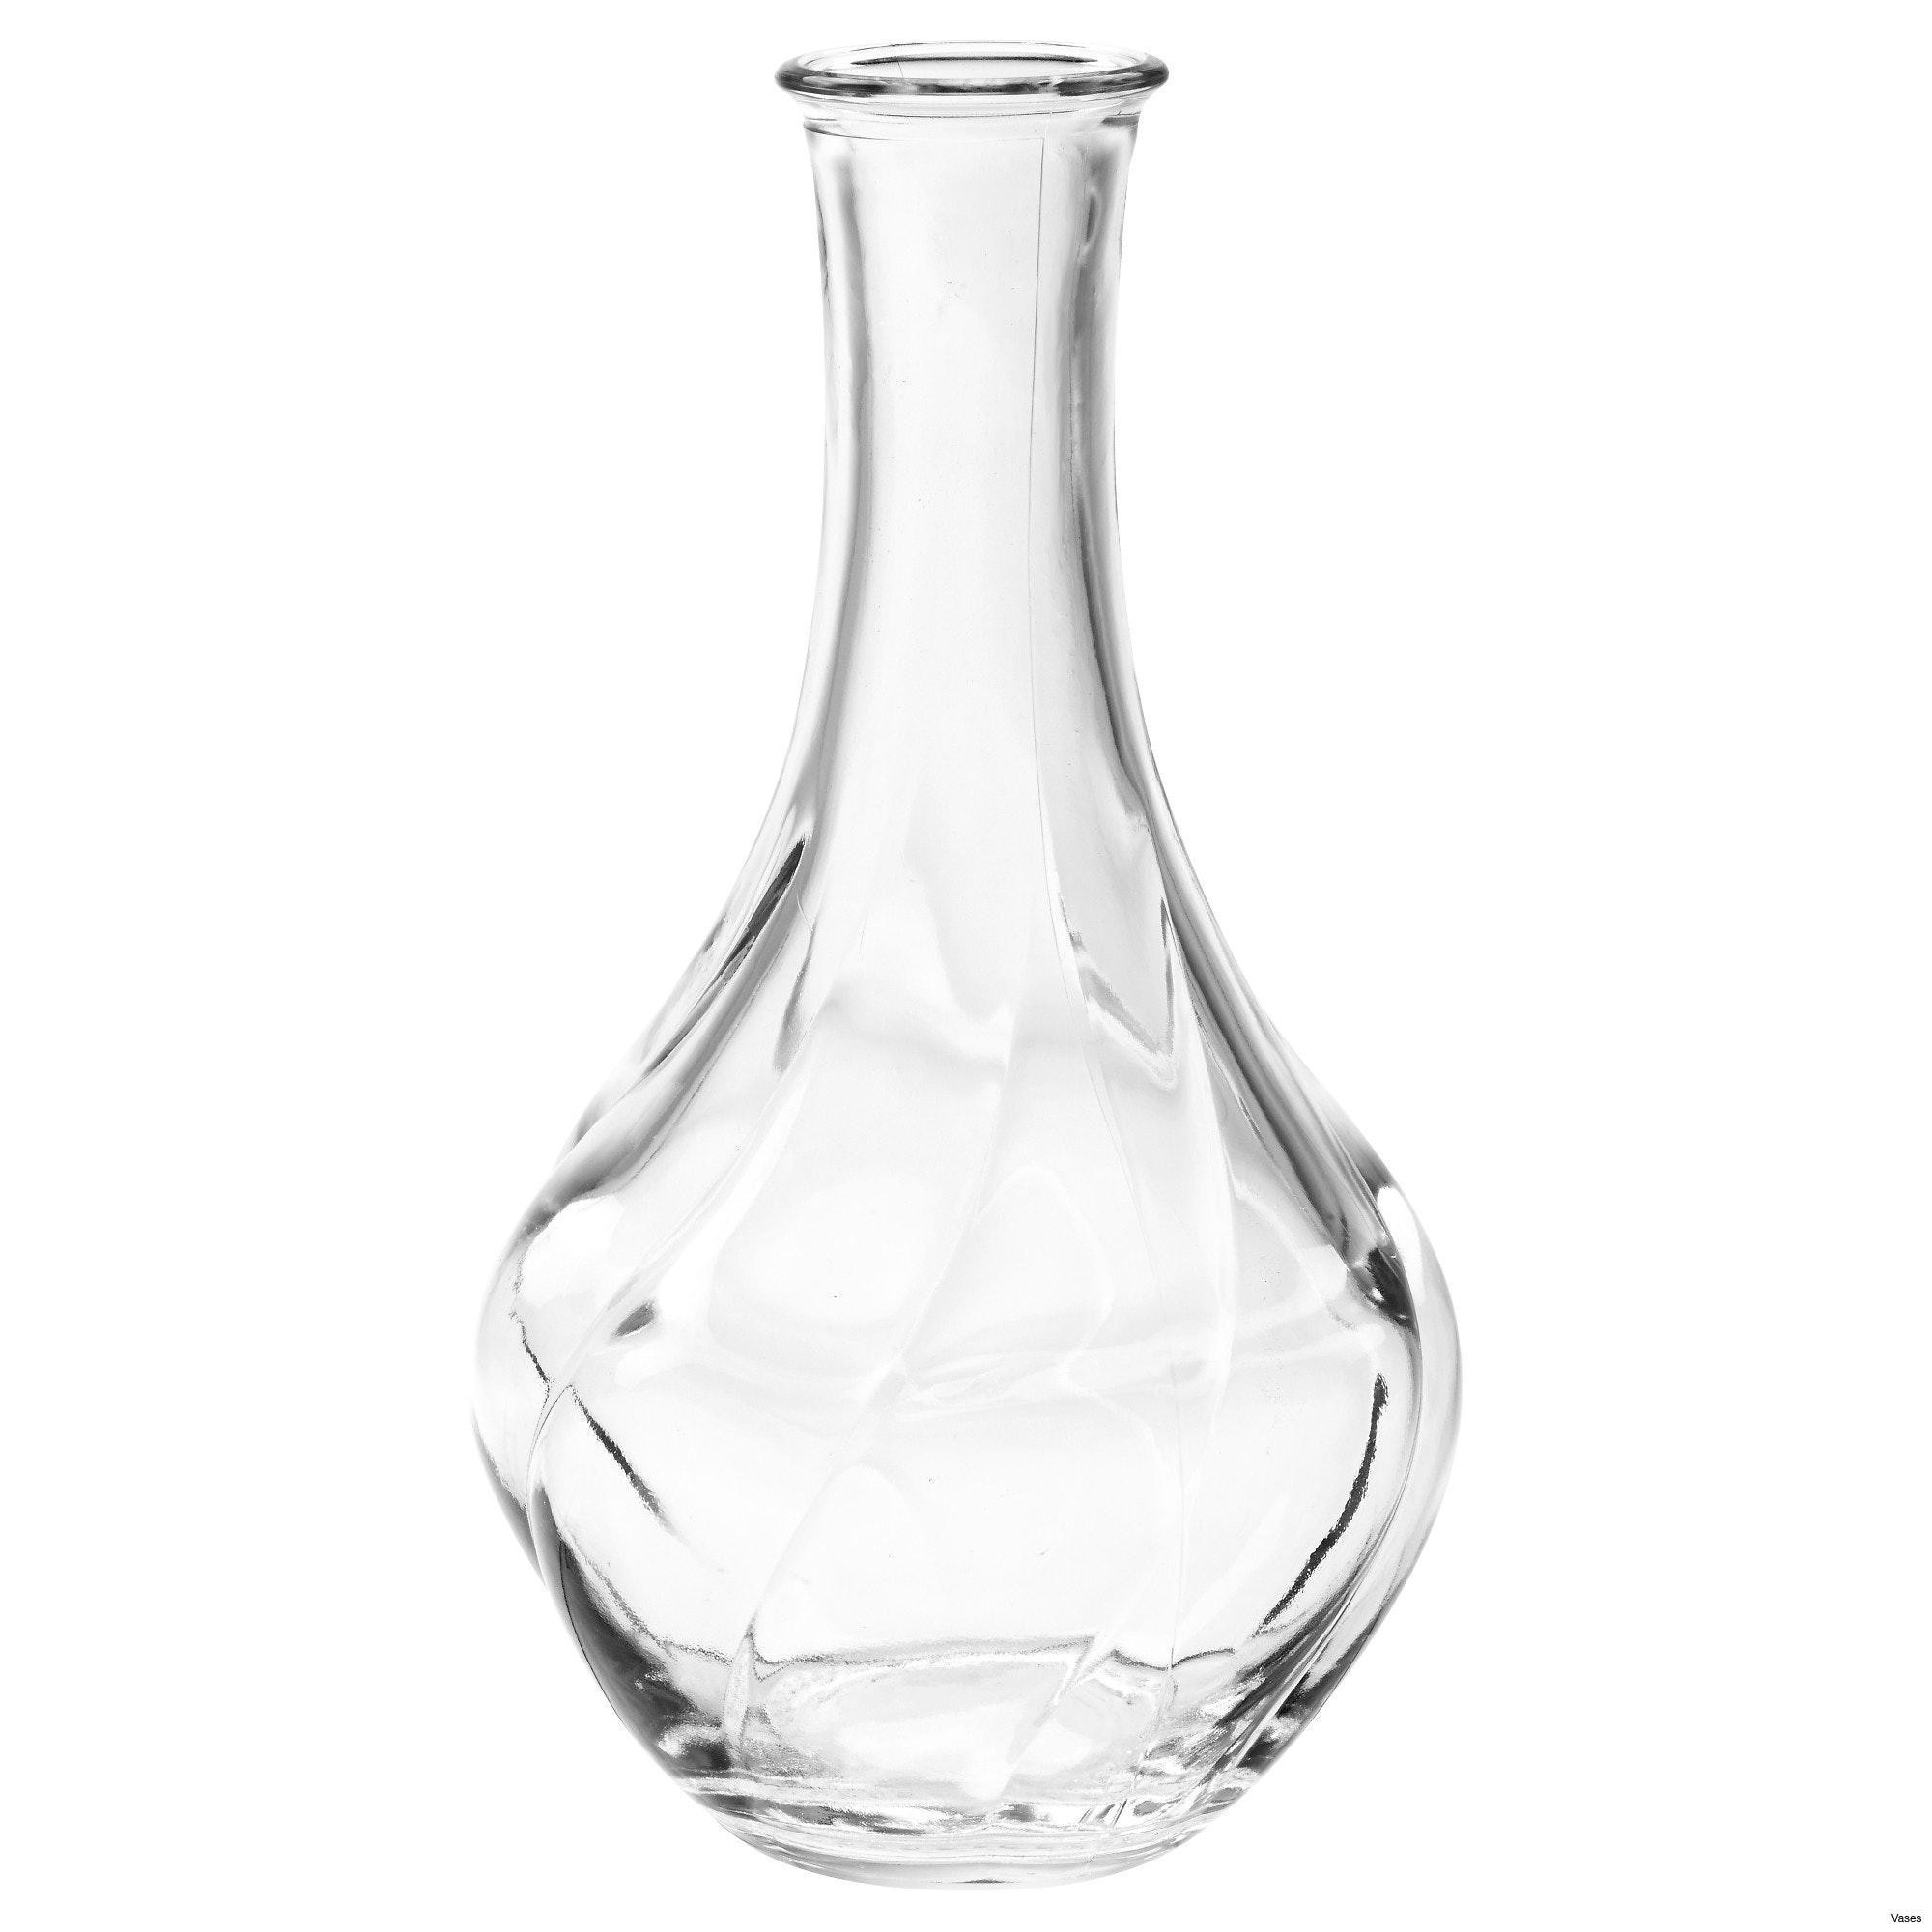 24 Unique Buy Vase Online 2024 free download buy vase online of collection of extra large glass vase vases artificial plants in extra large glass vase image living room glass vases fresh clear vase 0d tags amazing and